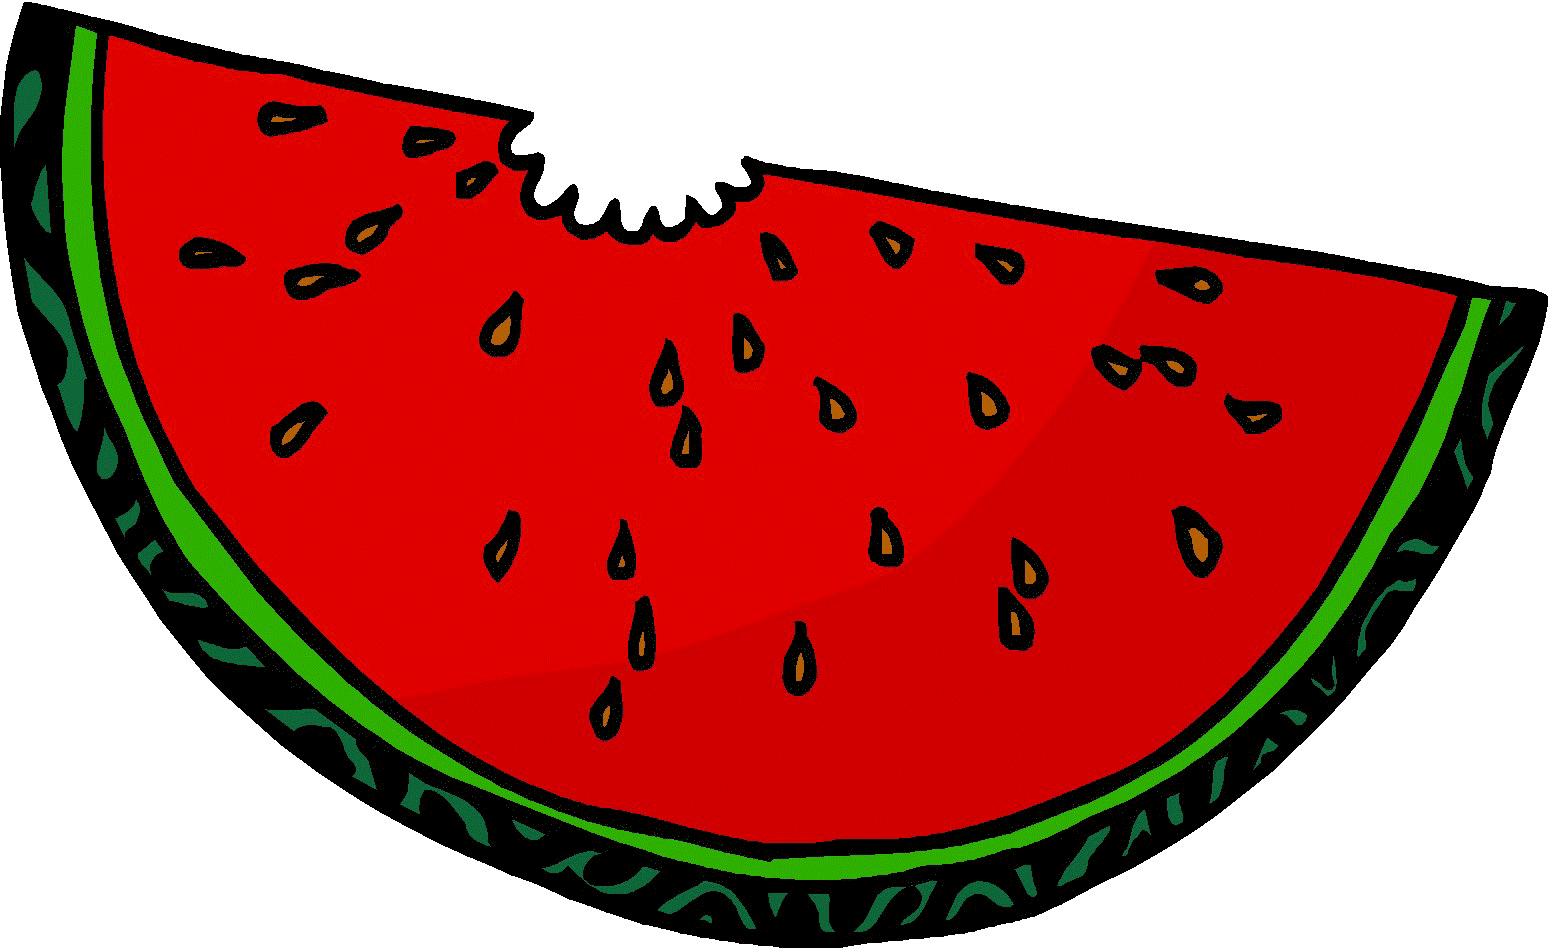 Watermelon clipart animated. Summer solstice run cancelled